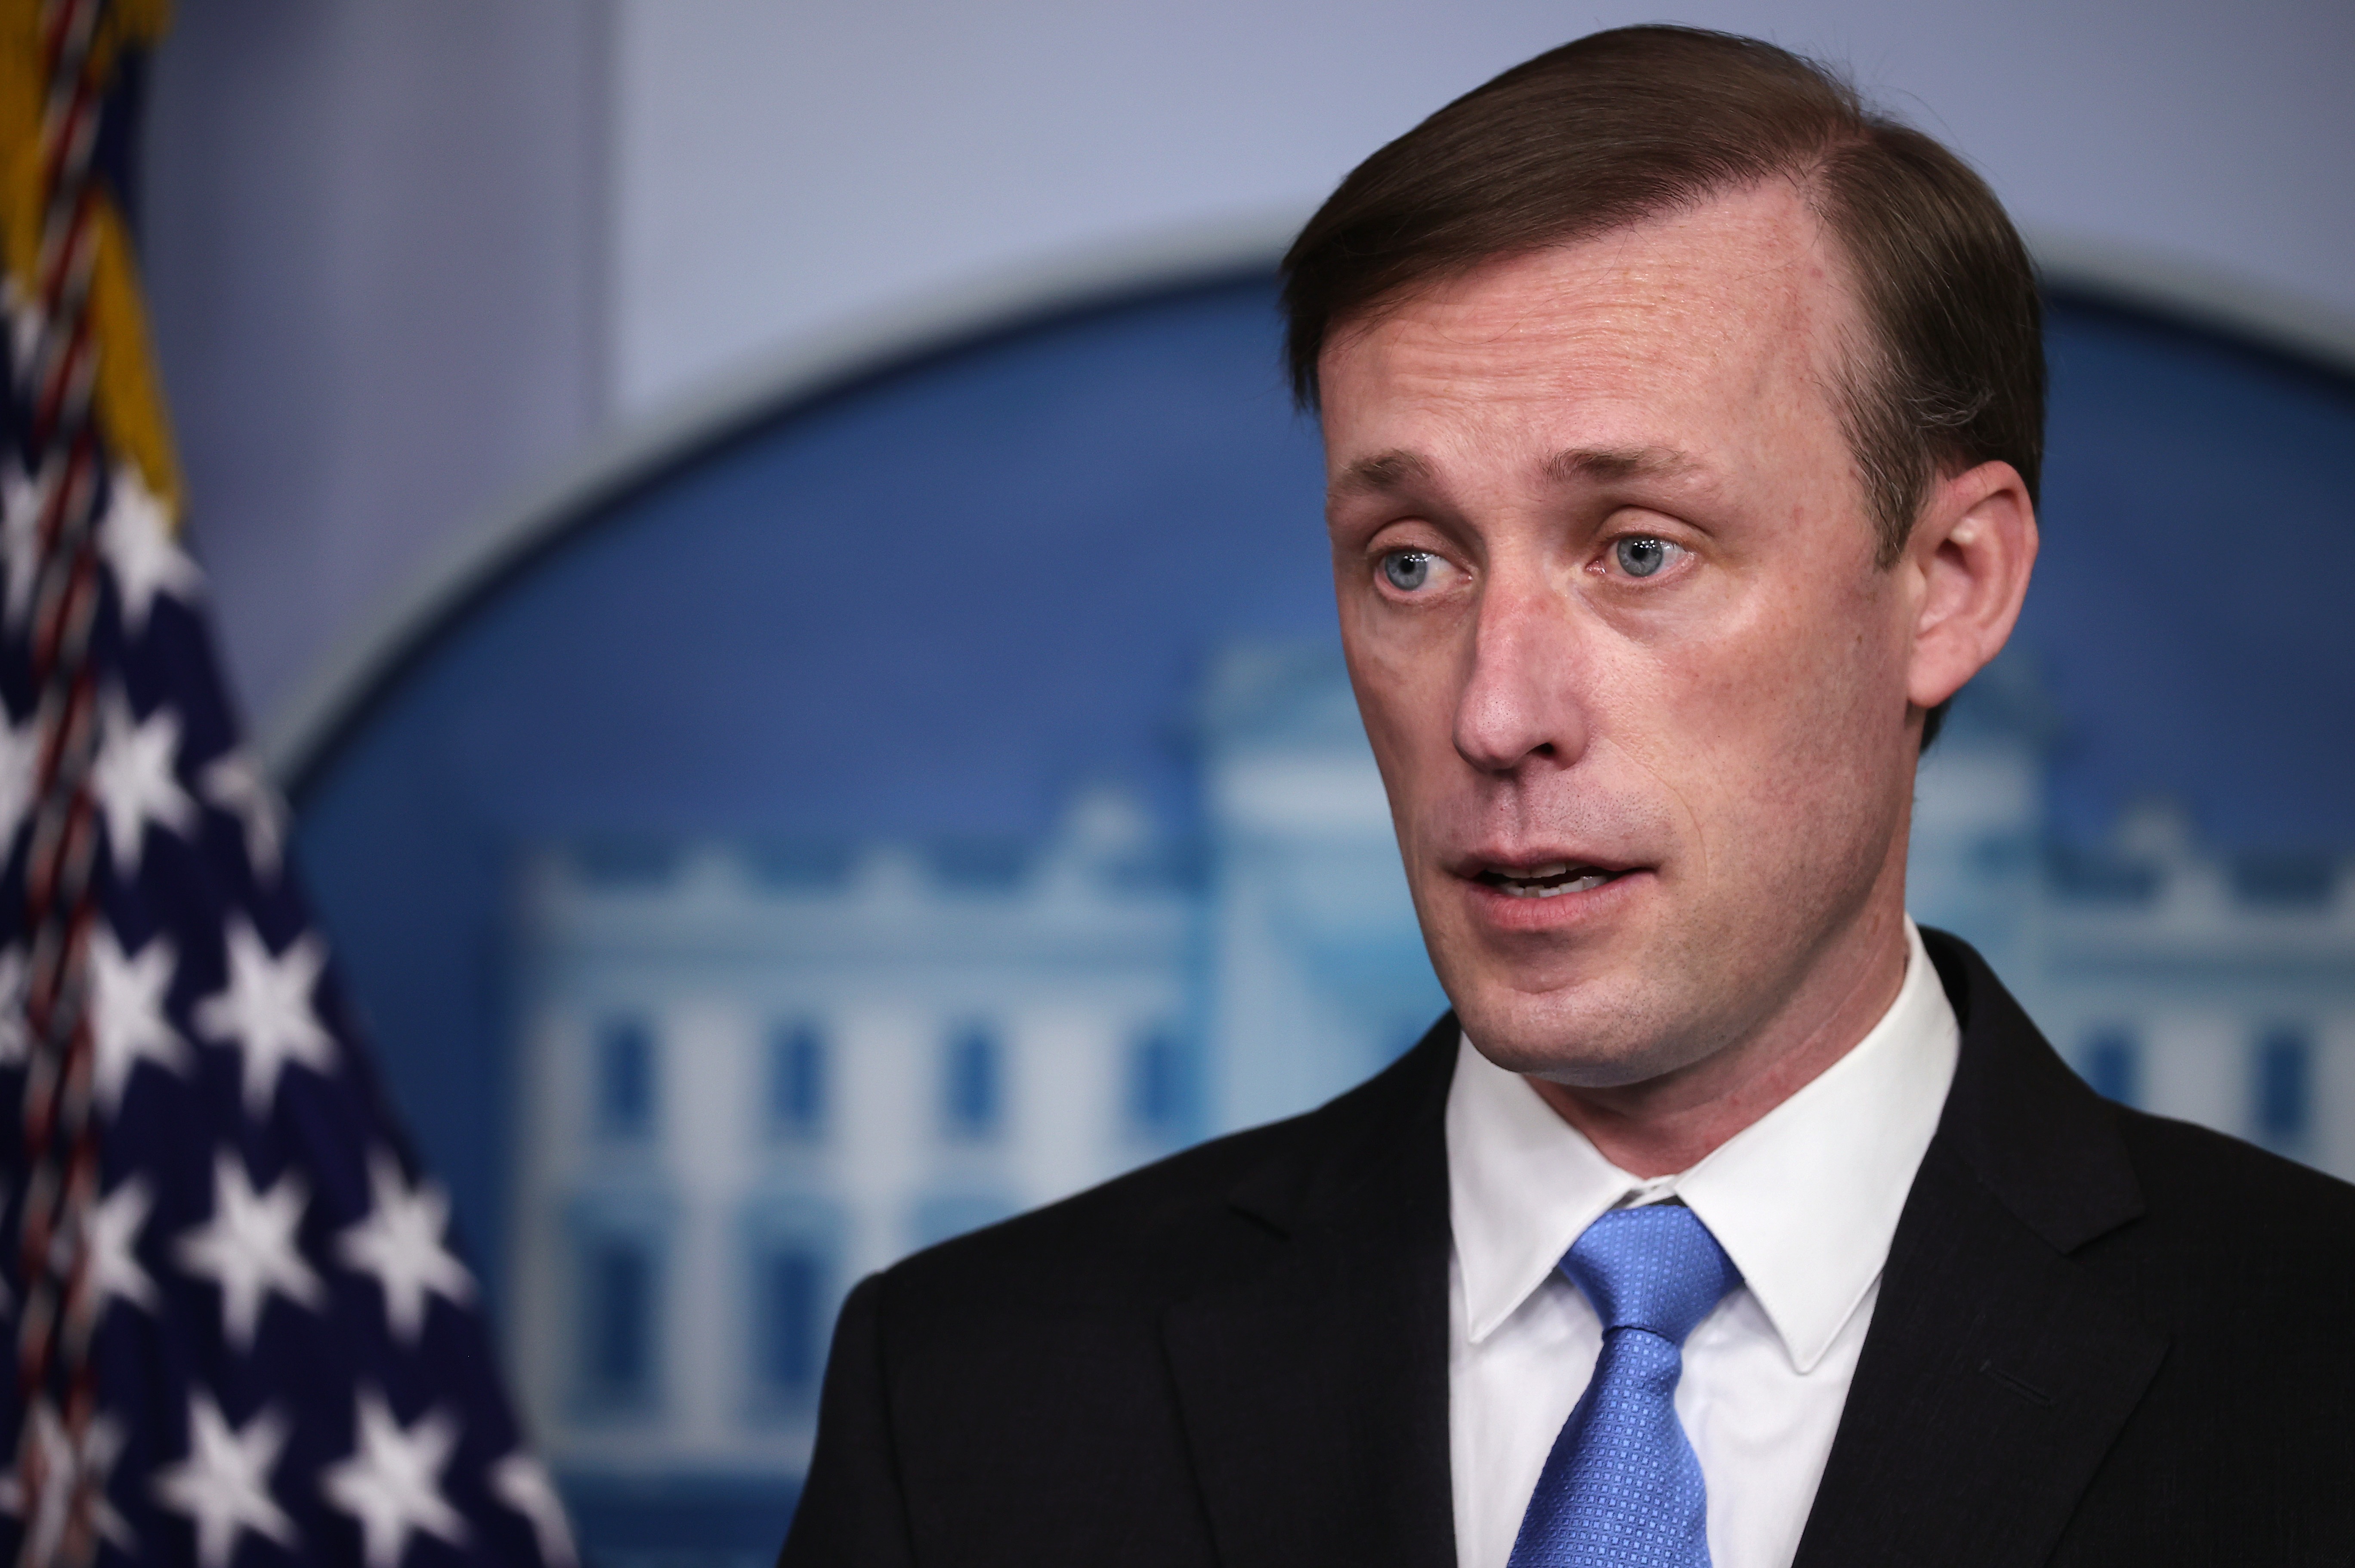 White House national security adviser Jake Sullivan, seen here during a press briefing on Feb. 4, told CBS the World Health Organization has more work to do to get to the bottom of where the coronavirus emerged. CREDIT: Chip Somodevilla/Getty Images